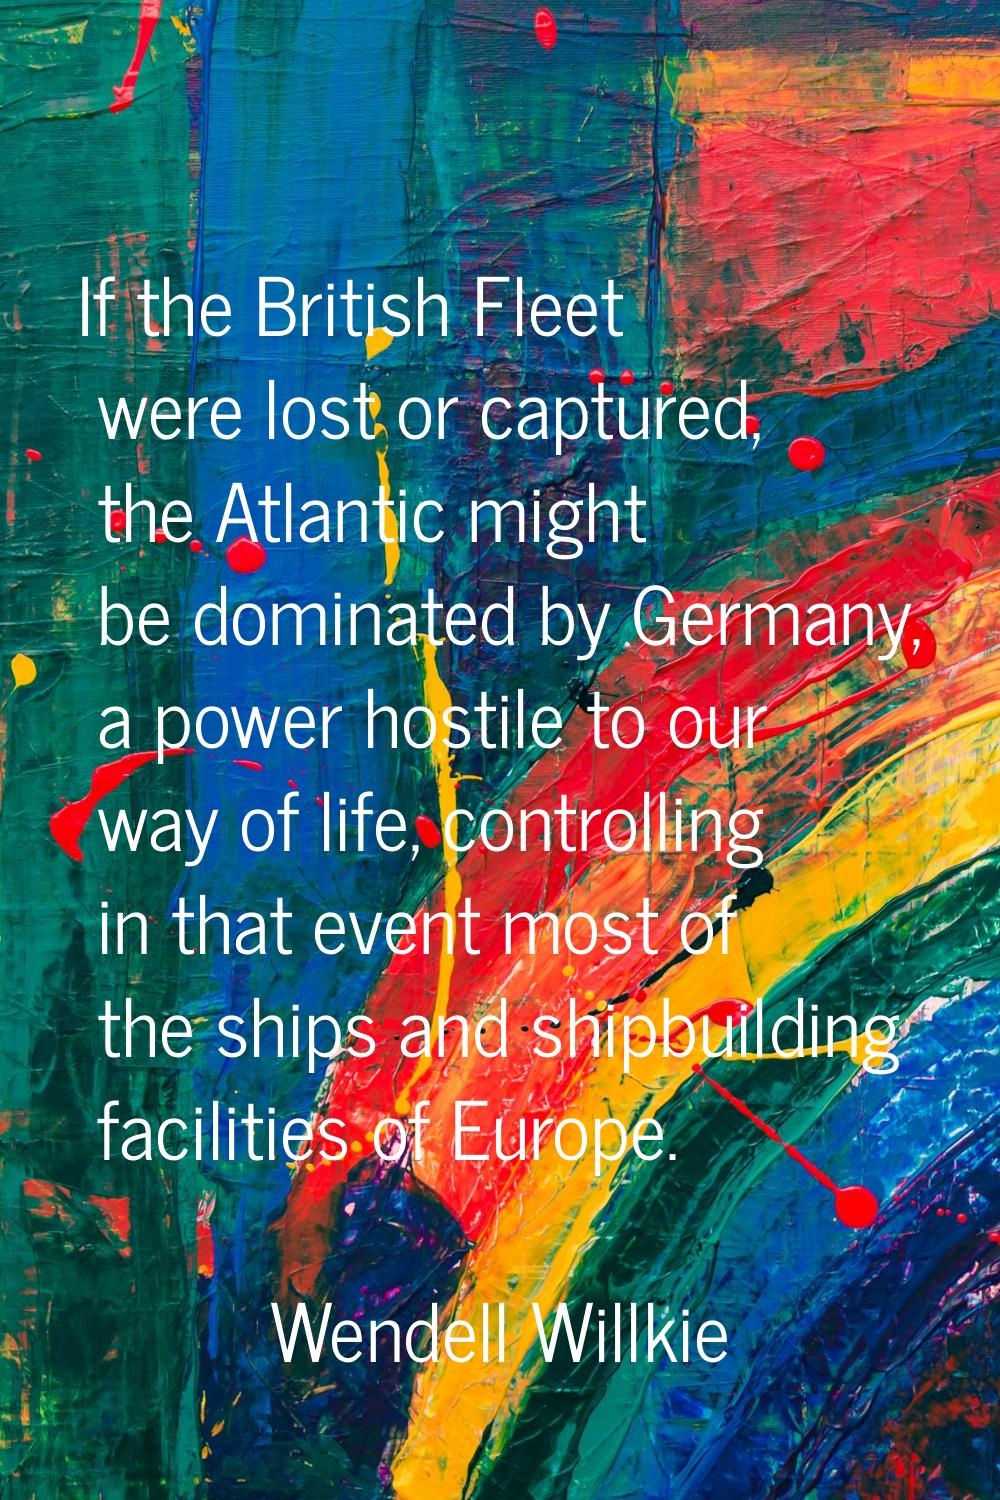 If the British Fleet were lost or captured, the Atlantic might be dominated by Germany, a power hos